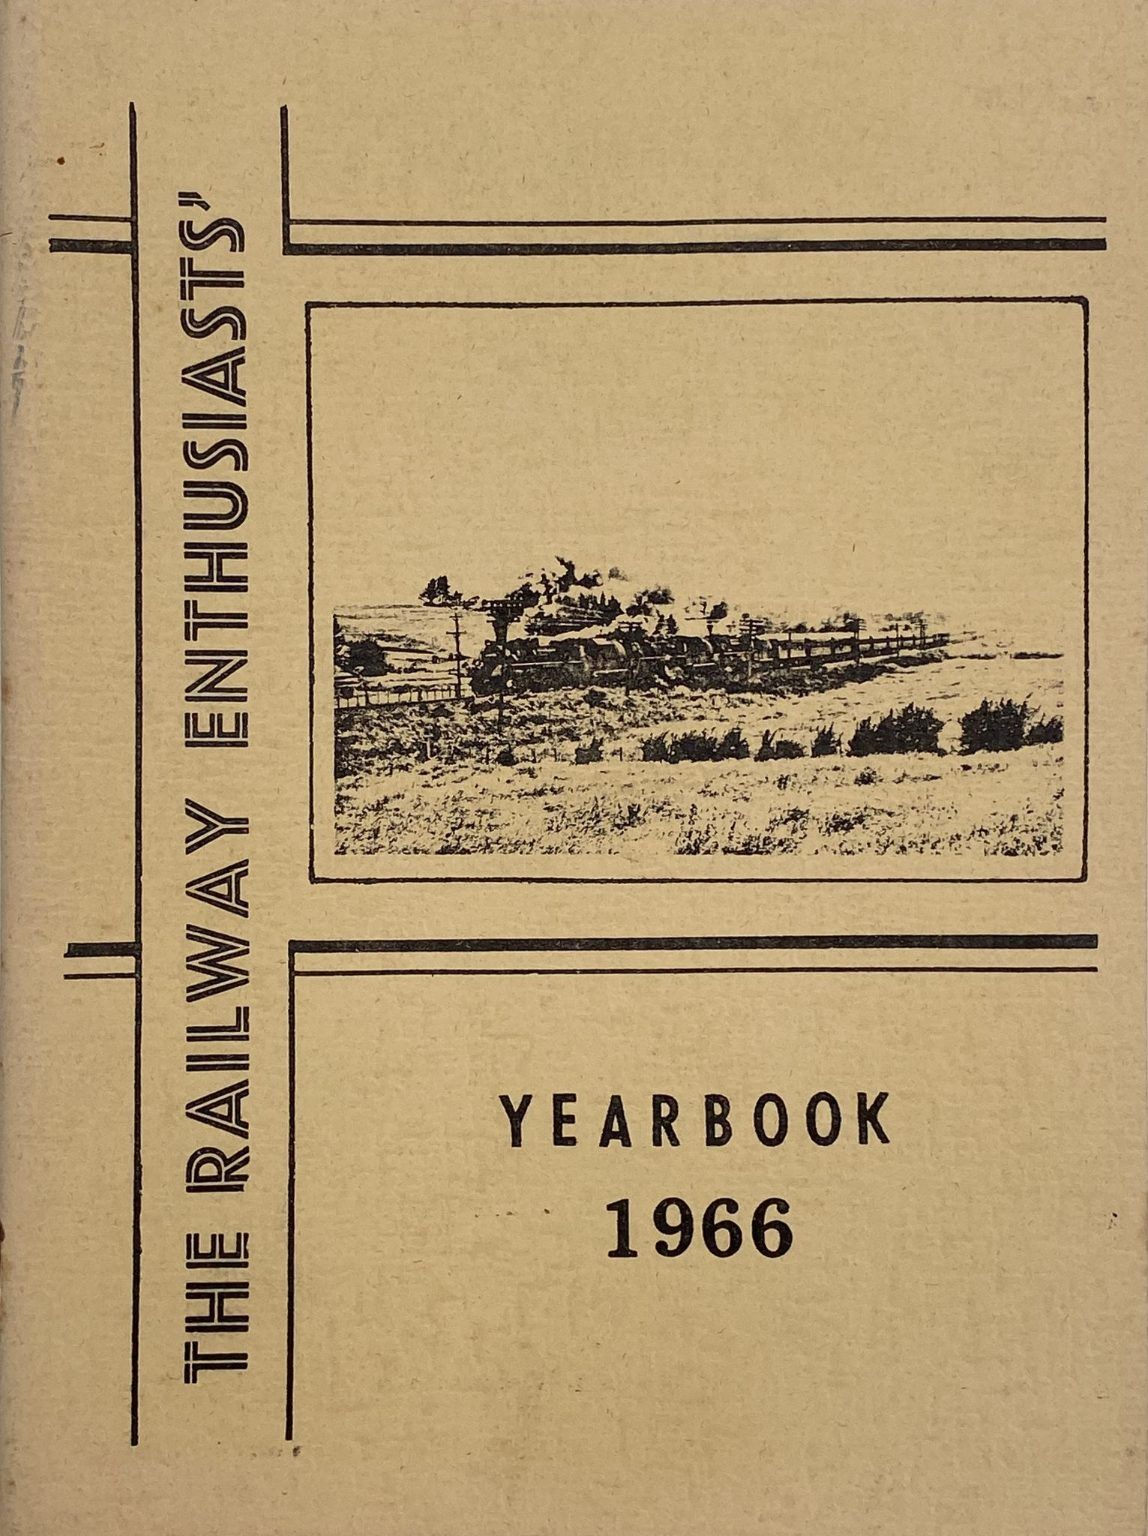 THE RAILWAY ENTHUSIASTS' YEARBOOK 1966